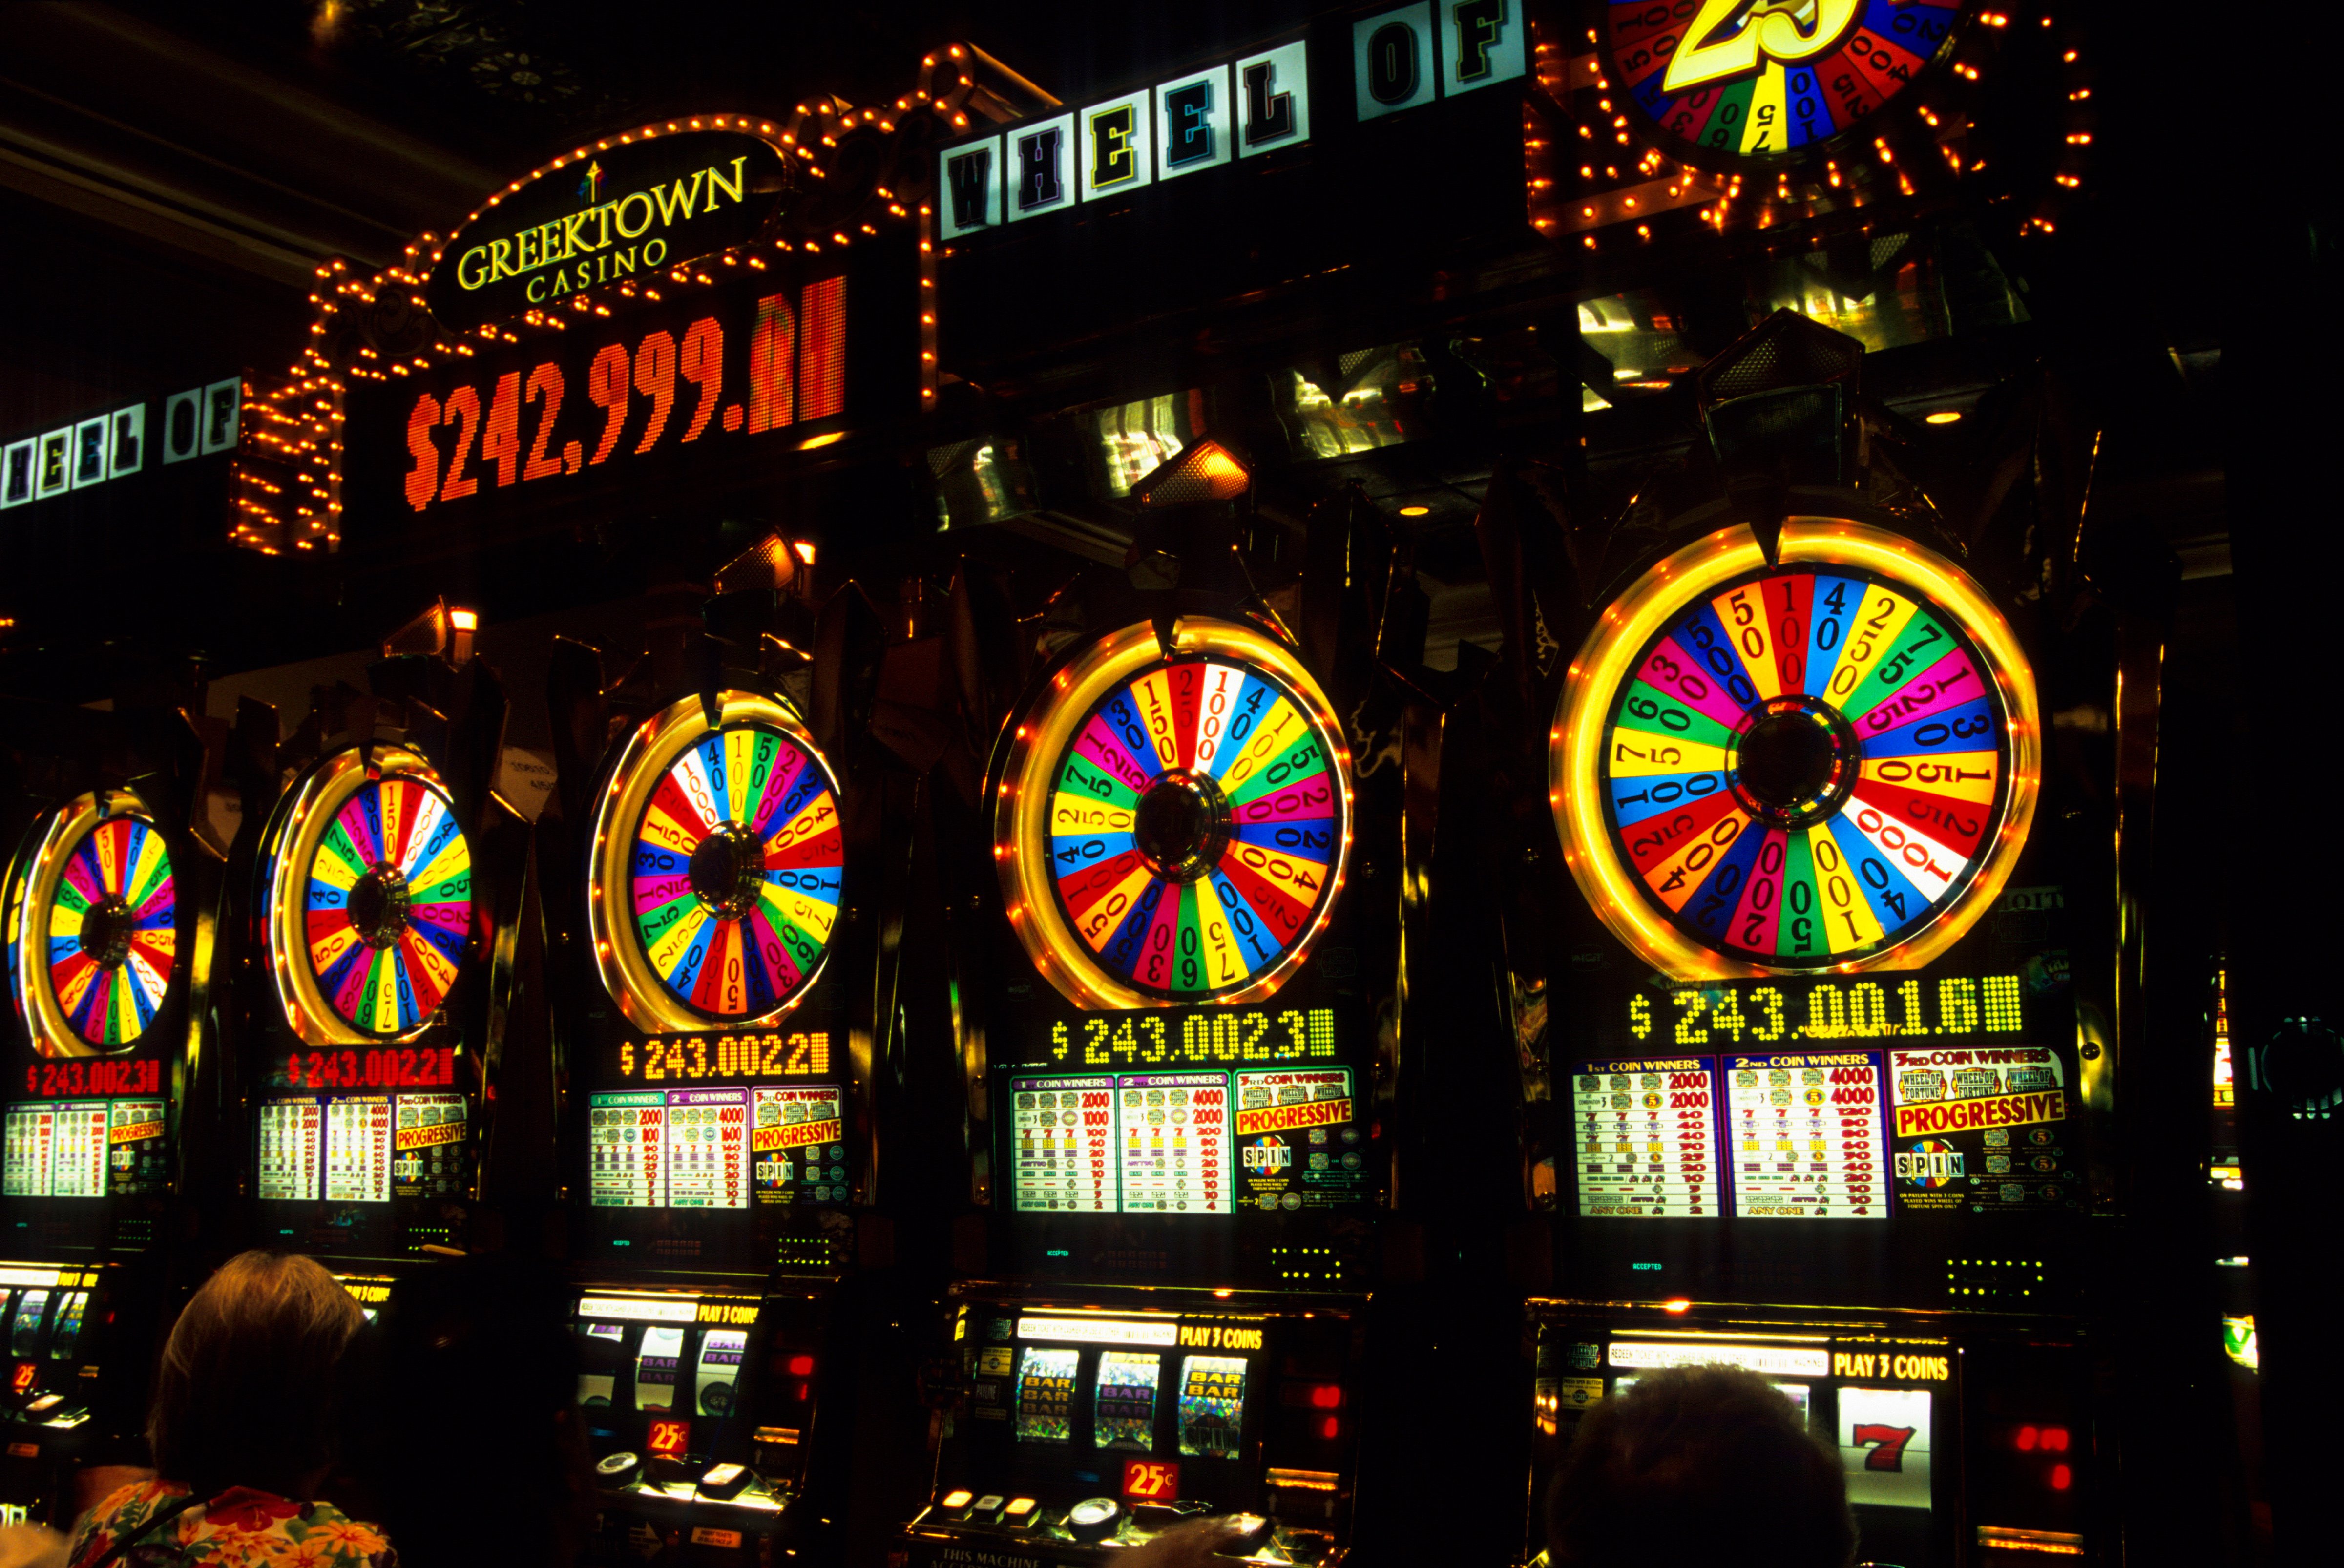 A Michigan woman won over $2 million while playing the Wheel of Fortune slots at Greektown Casino-Hotel. (Wolfgang Kaehler/LightRocket via Getty Images)